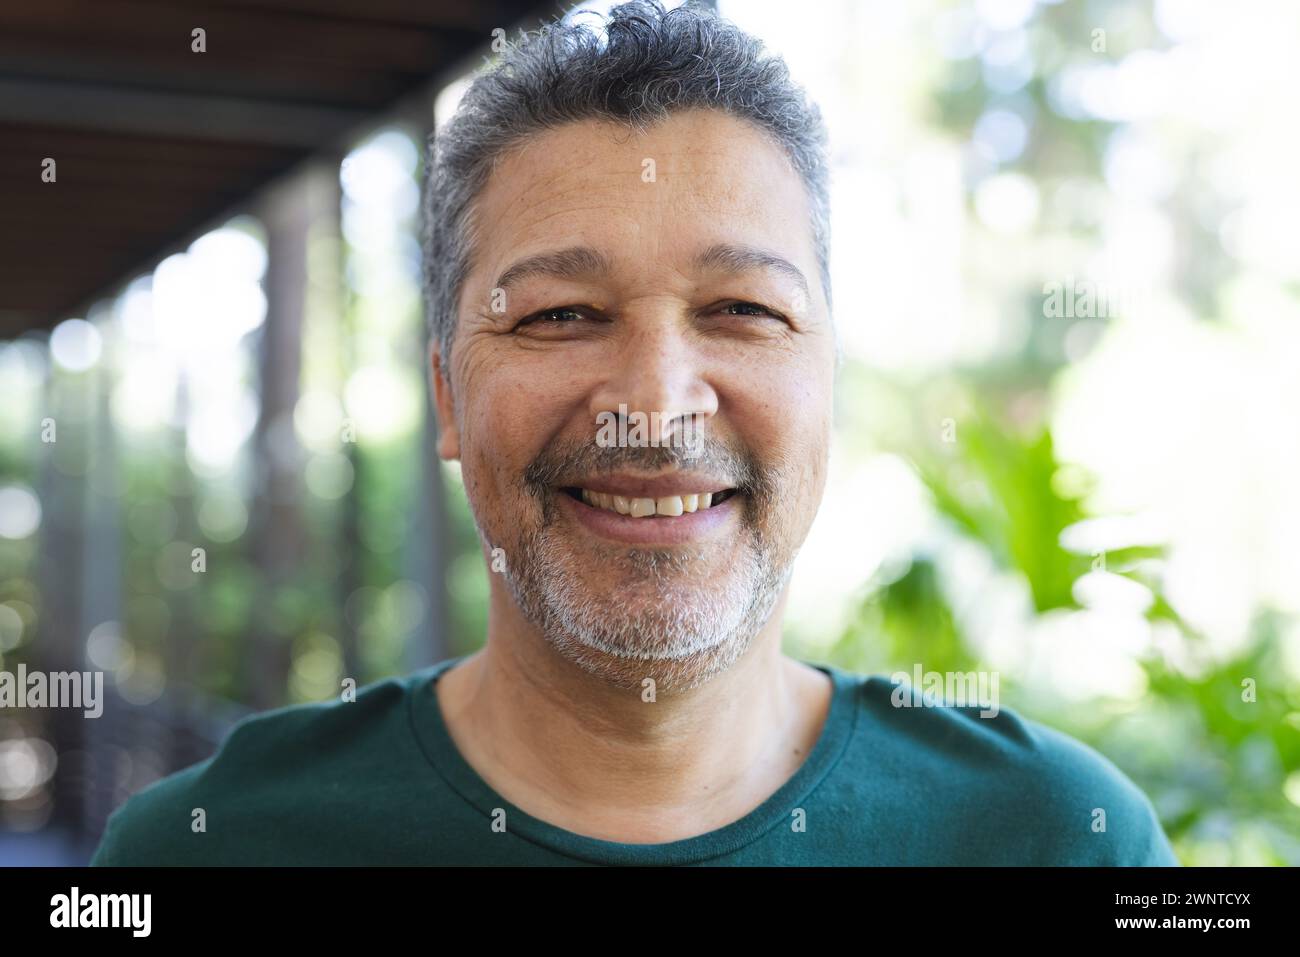 Senior biracial man with salt-and-pepper hair smiles warmly Stock Photo